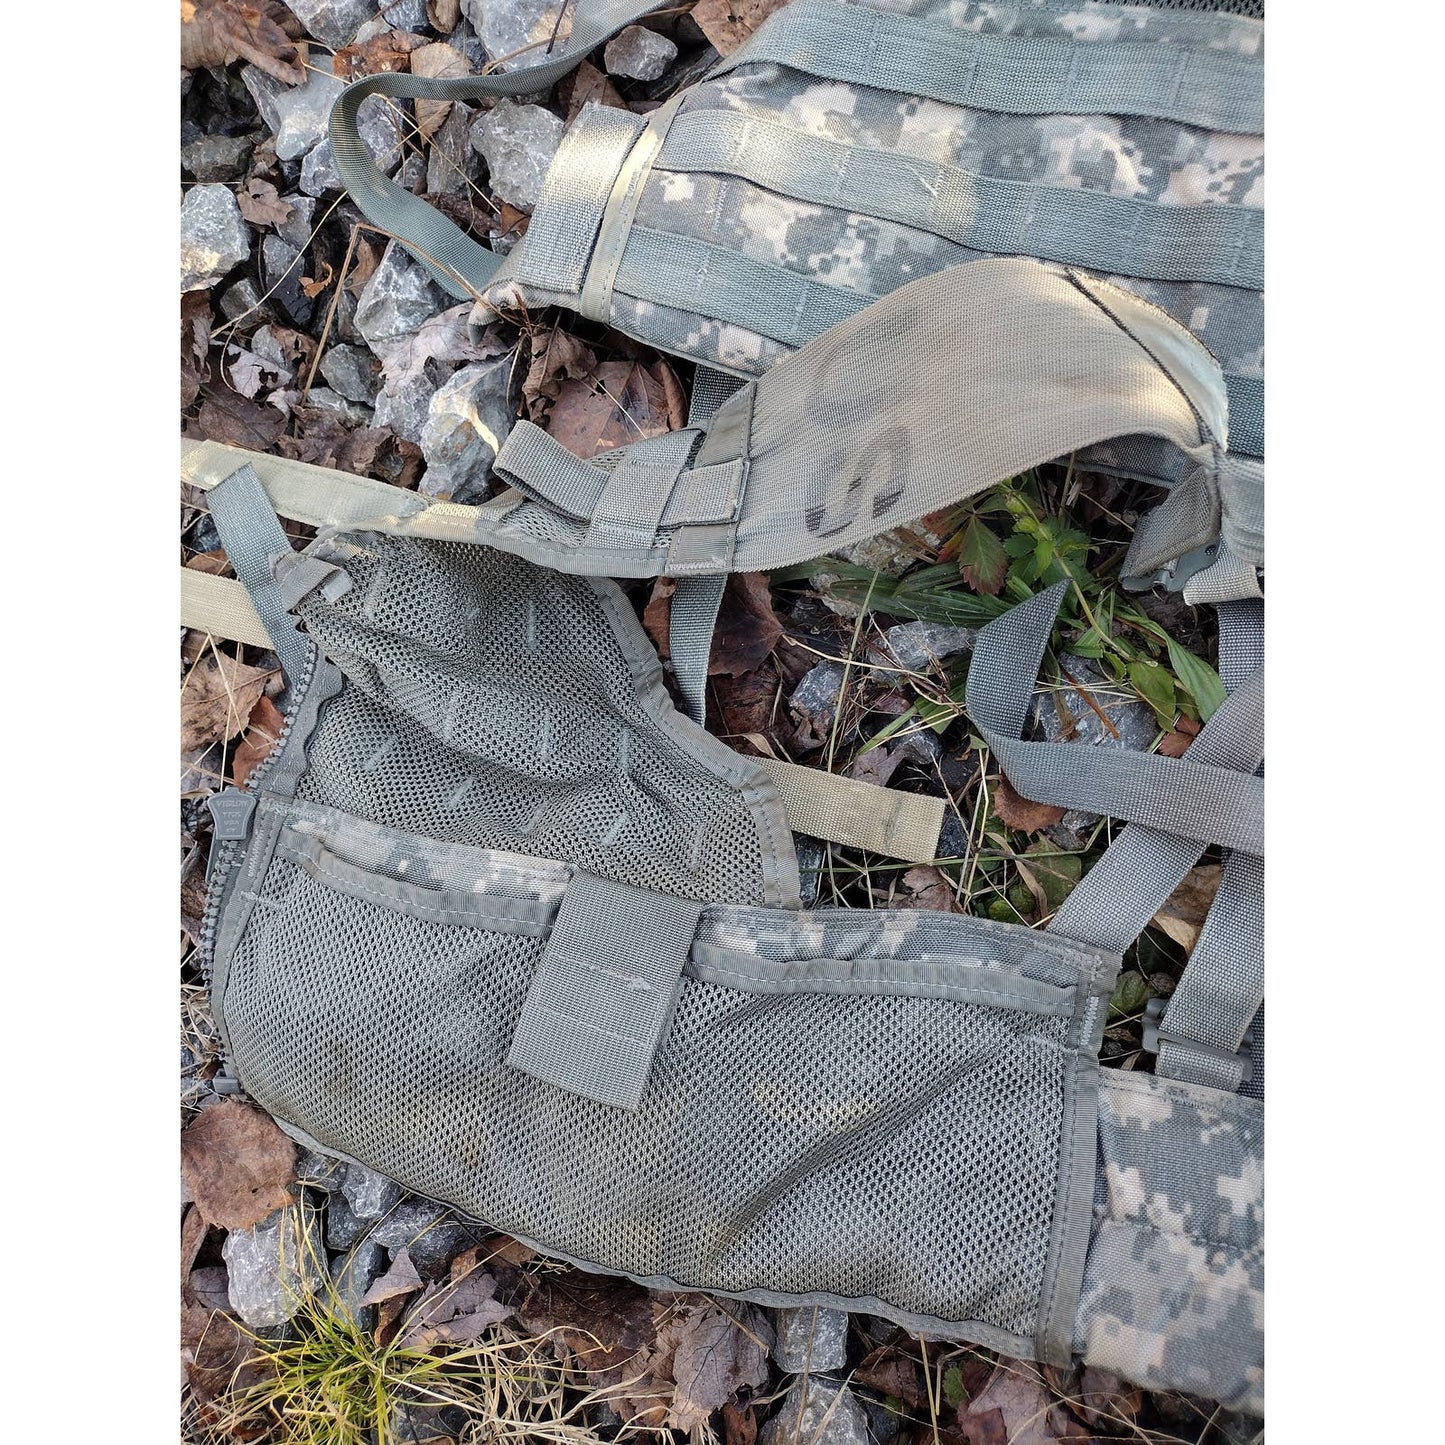 US Army Issued Flc Vest Load Bearing Equipment Vests | FREE SHIPPING | Military Surplus Army Surplus